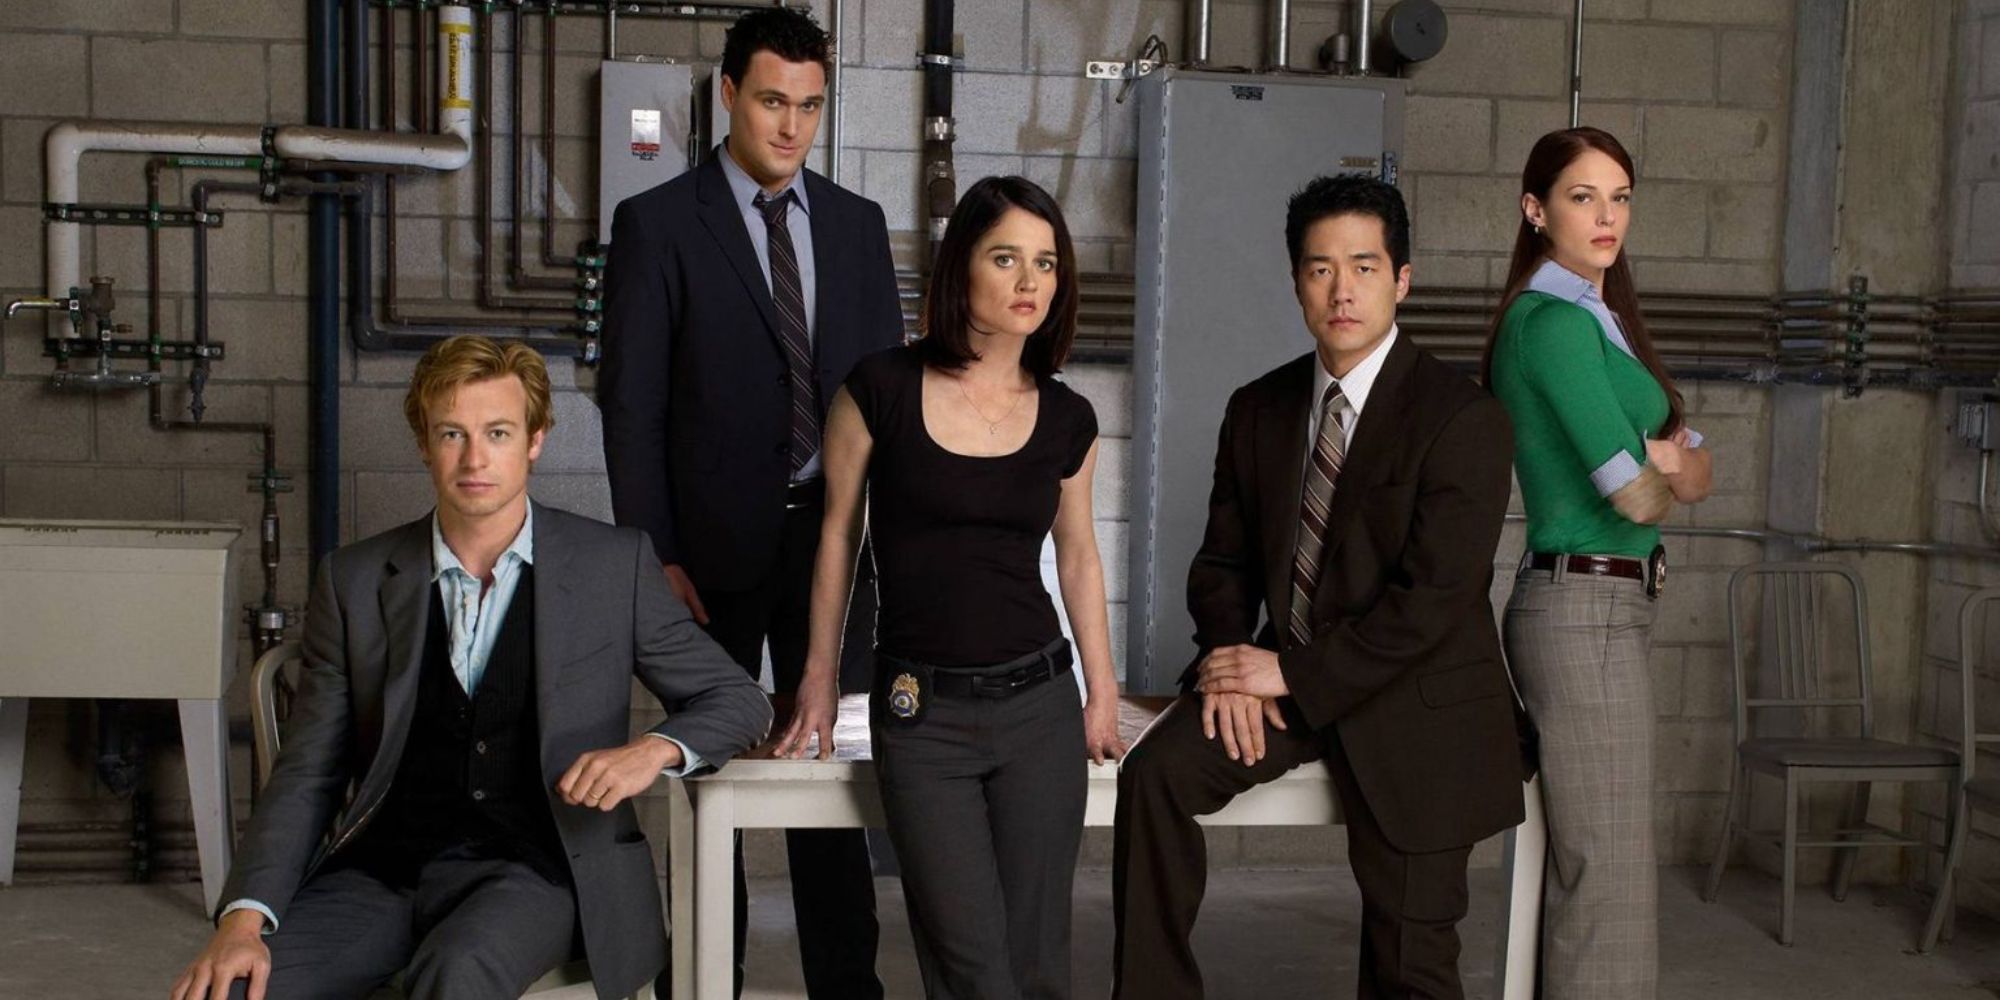 The cast of 'The Mentalist'